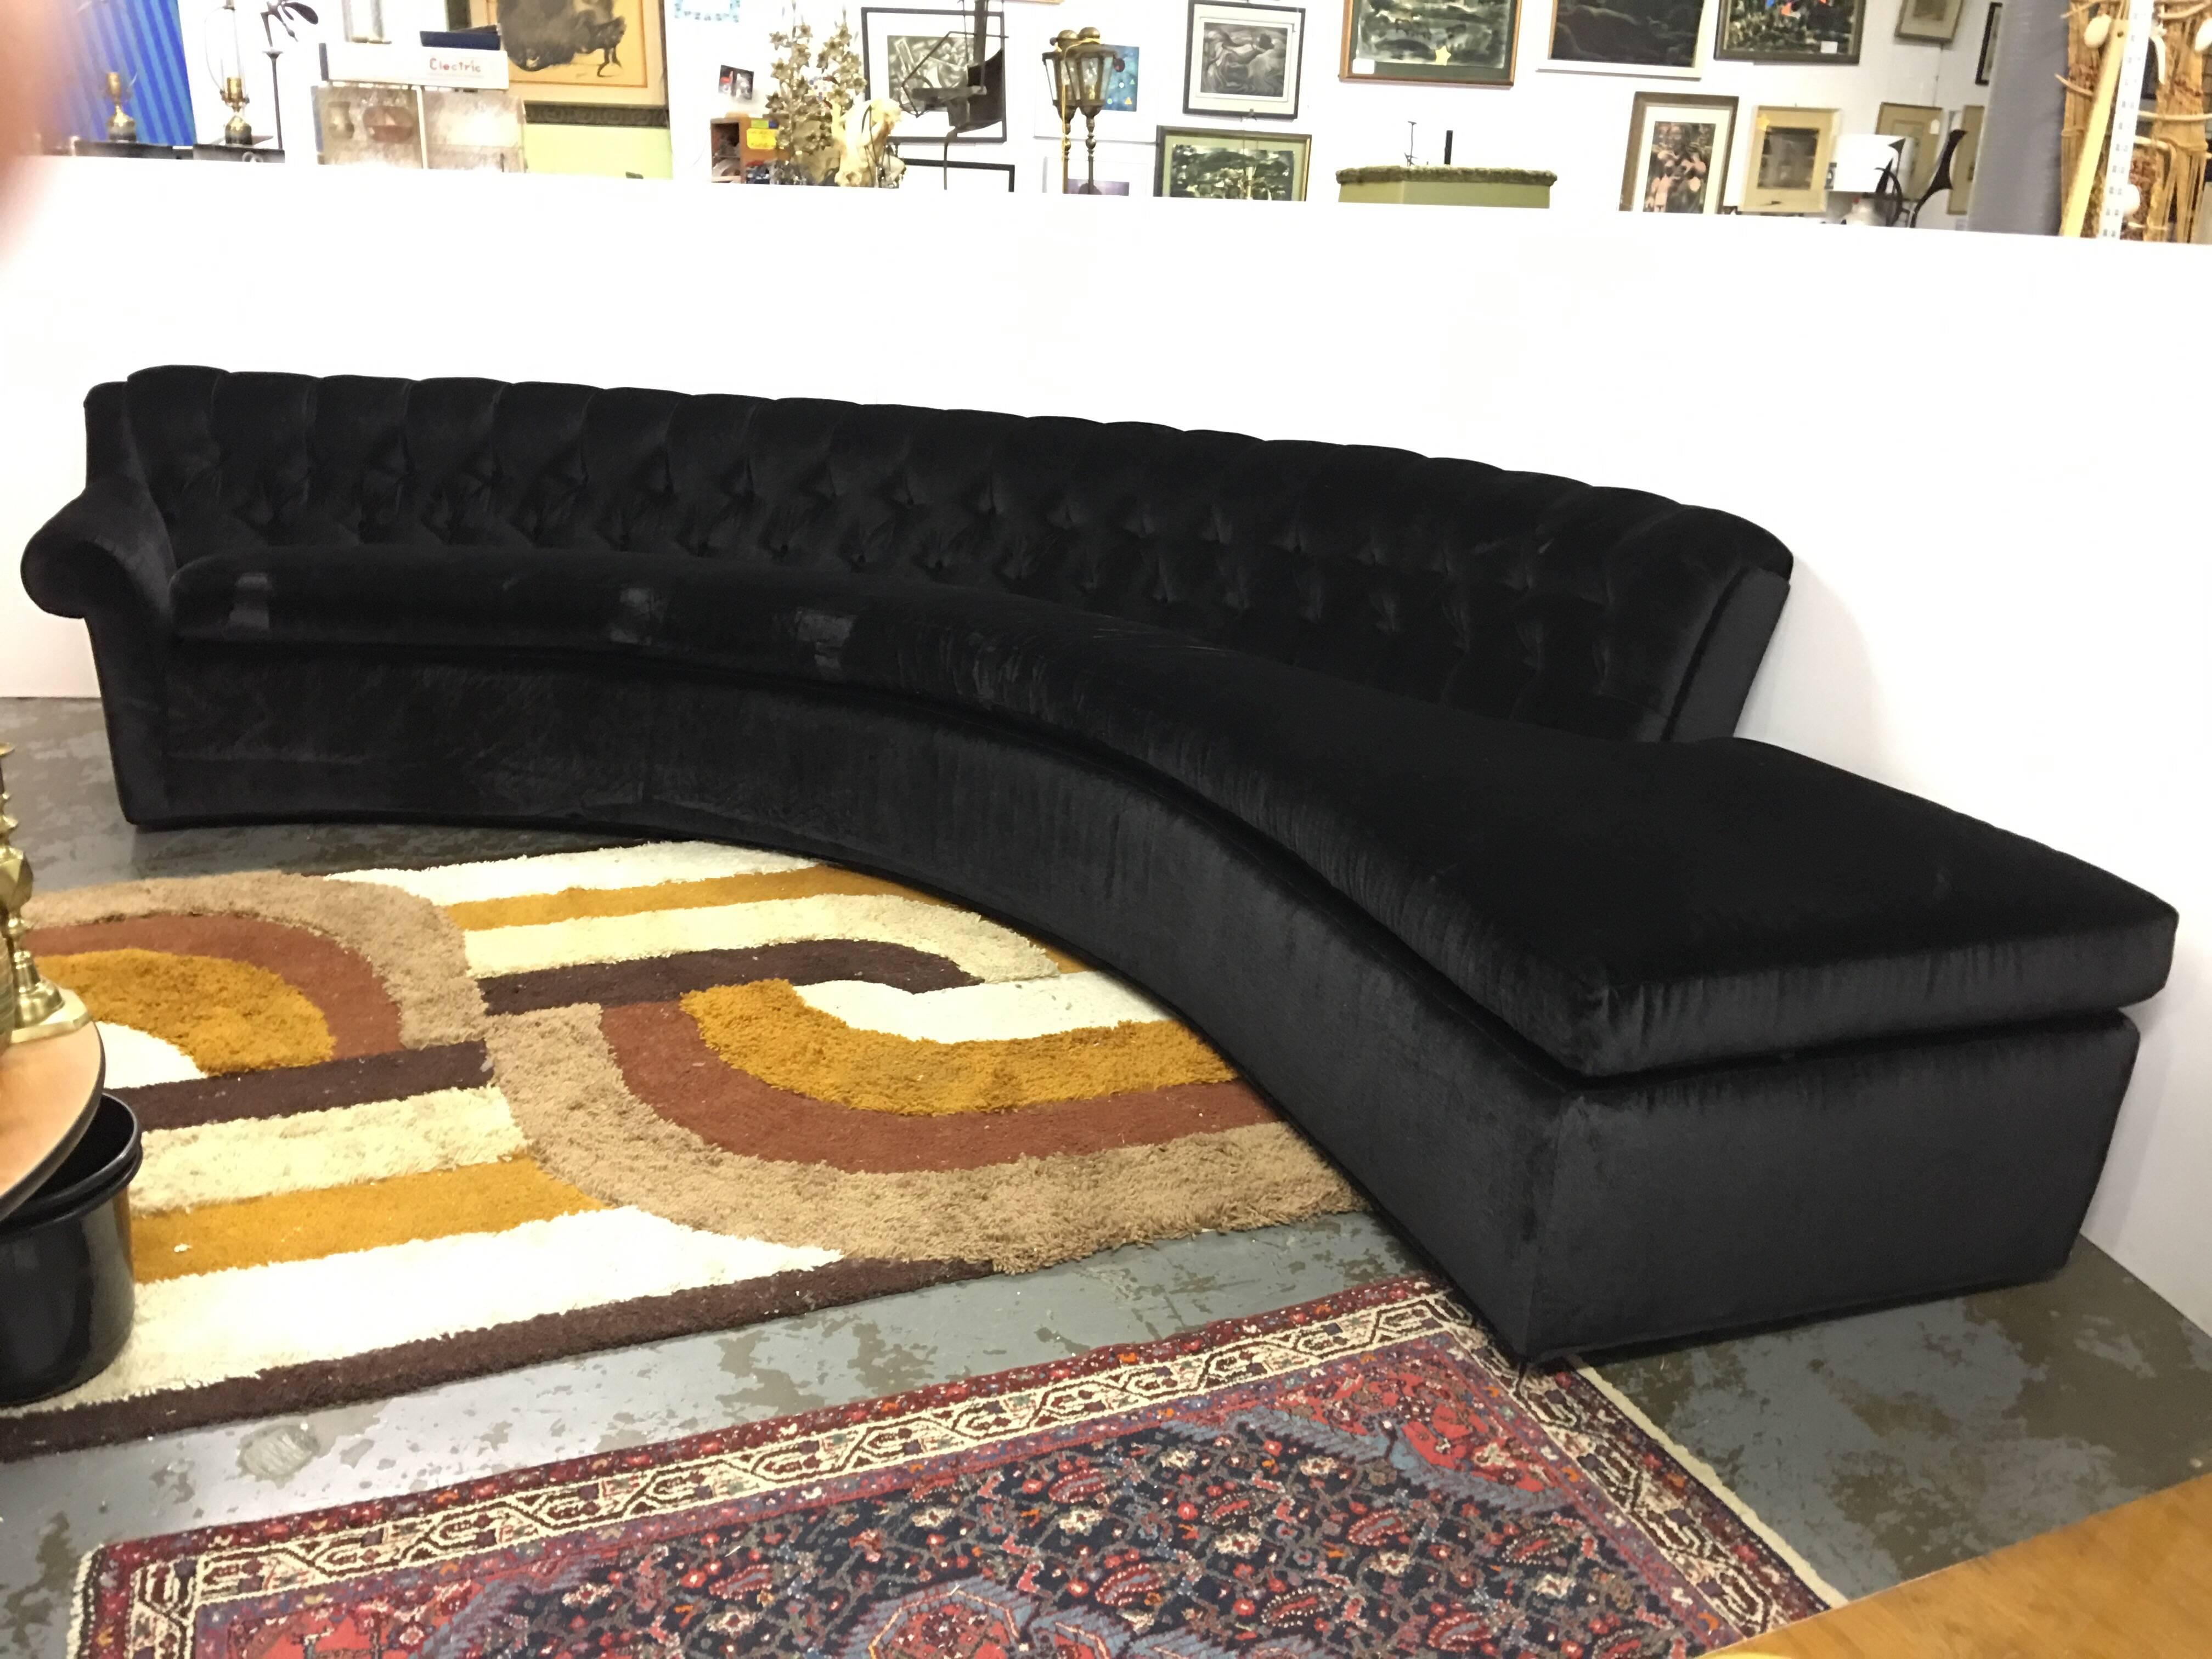 This sofa is amazing. It is curved with a tufted back, all one piece! It is a vintage custom sofa from the 1950s or 1960s era, that has been redone newly in Kelly Wearstler black mohair fabric. It is quite stunning in person. It has a deep seating